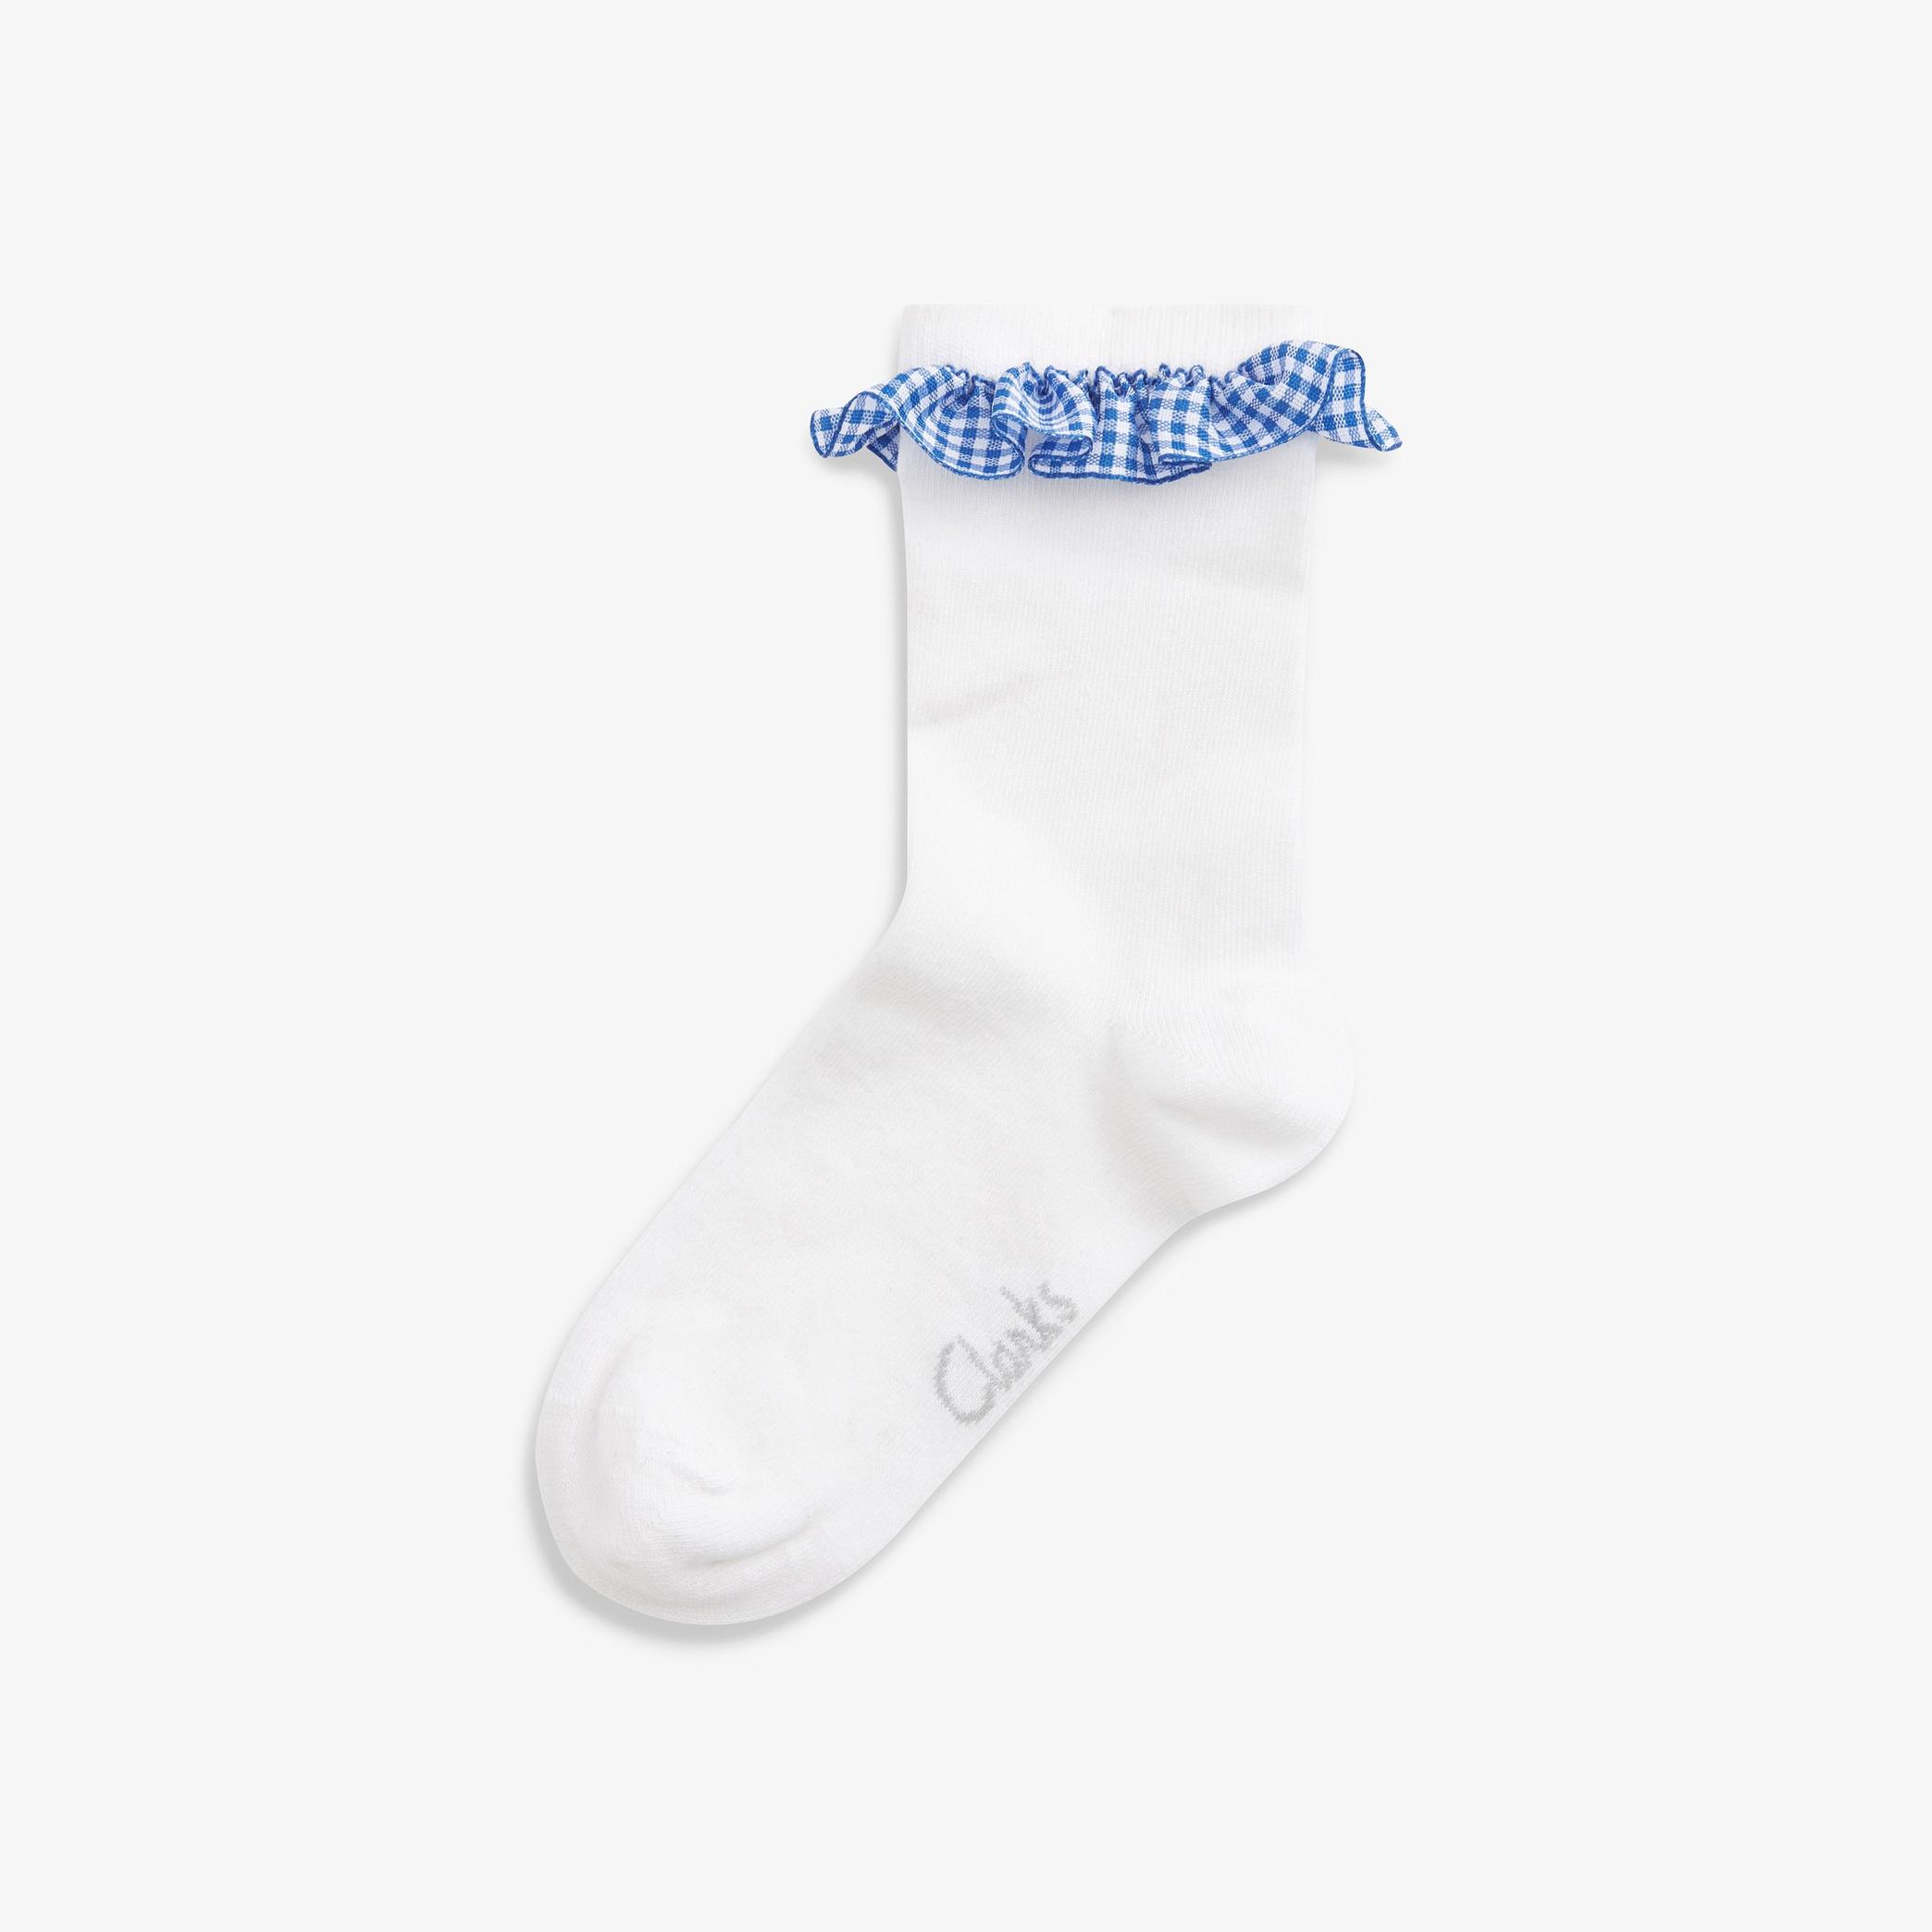 Ging Blue Sz6-8.5 White/Blue Socks, view 1 of 2